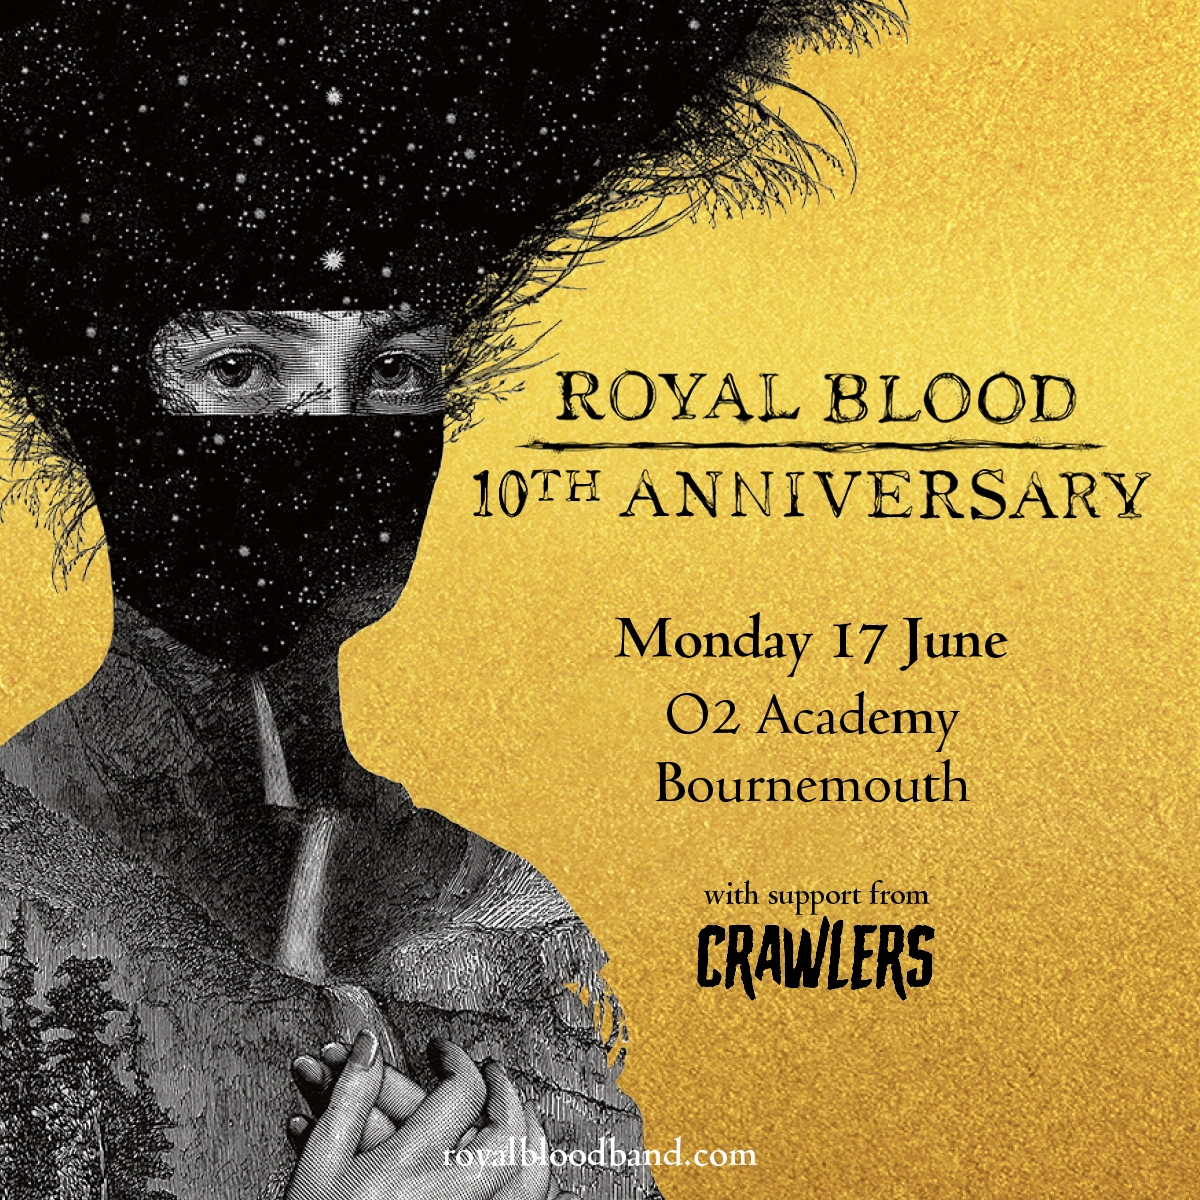 Royal Blood at O2 Academy Bournemouth Tickets